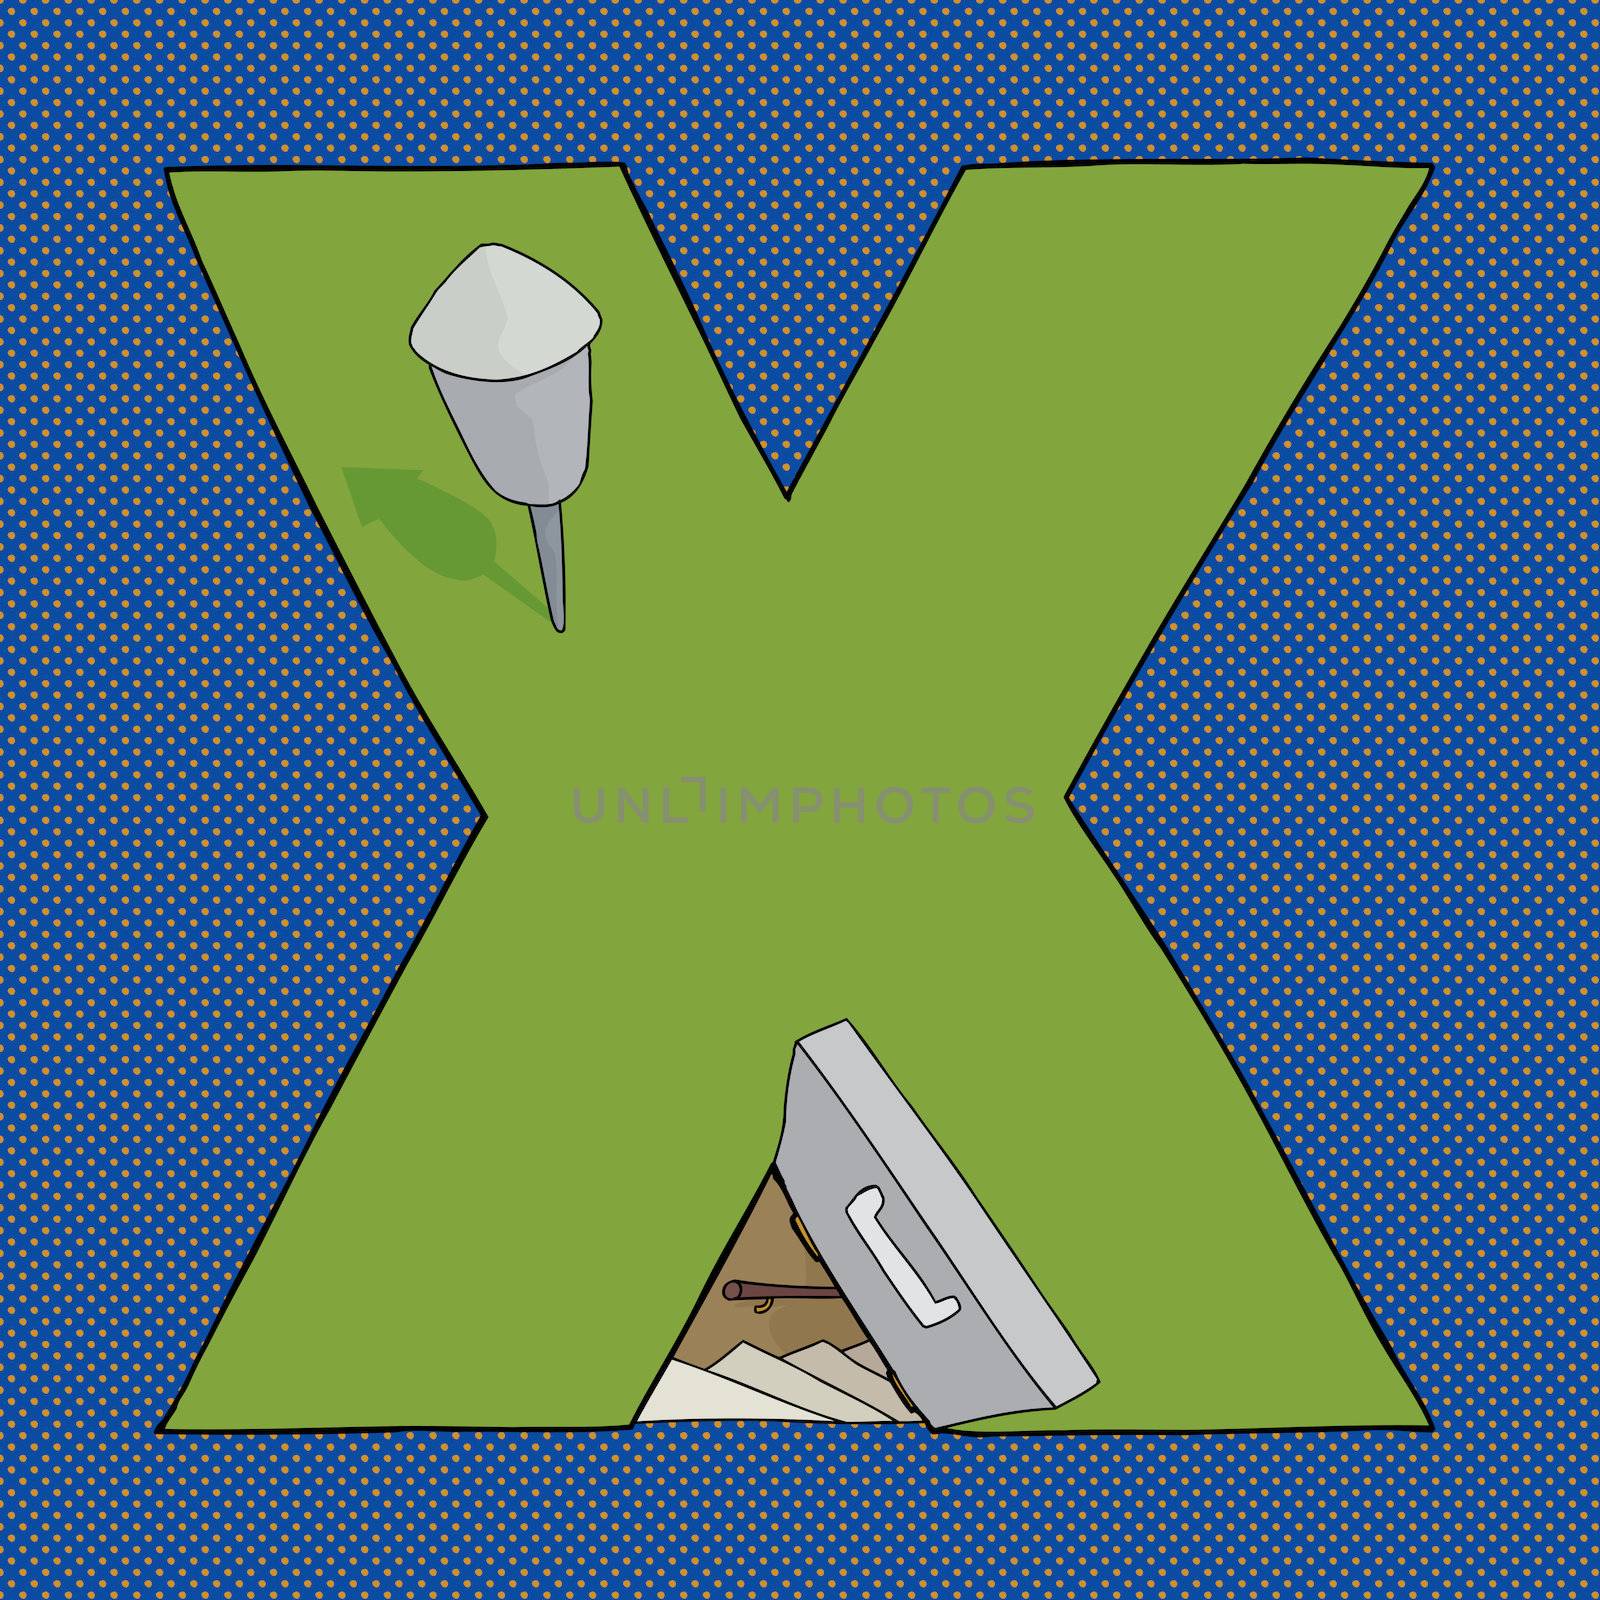 Bomb shelter in the shape of the letter X